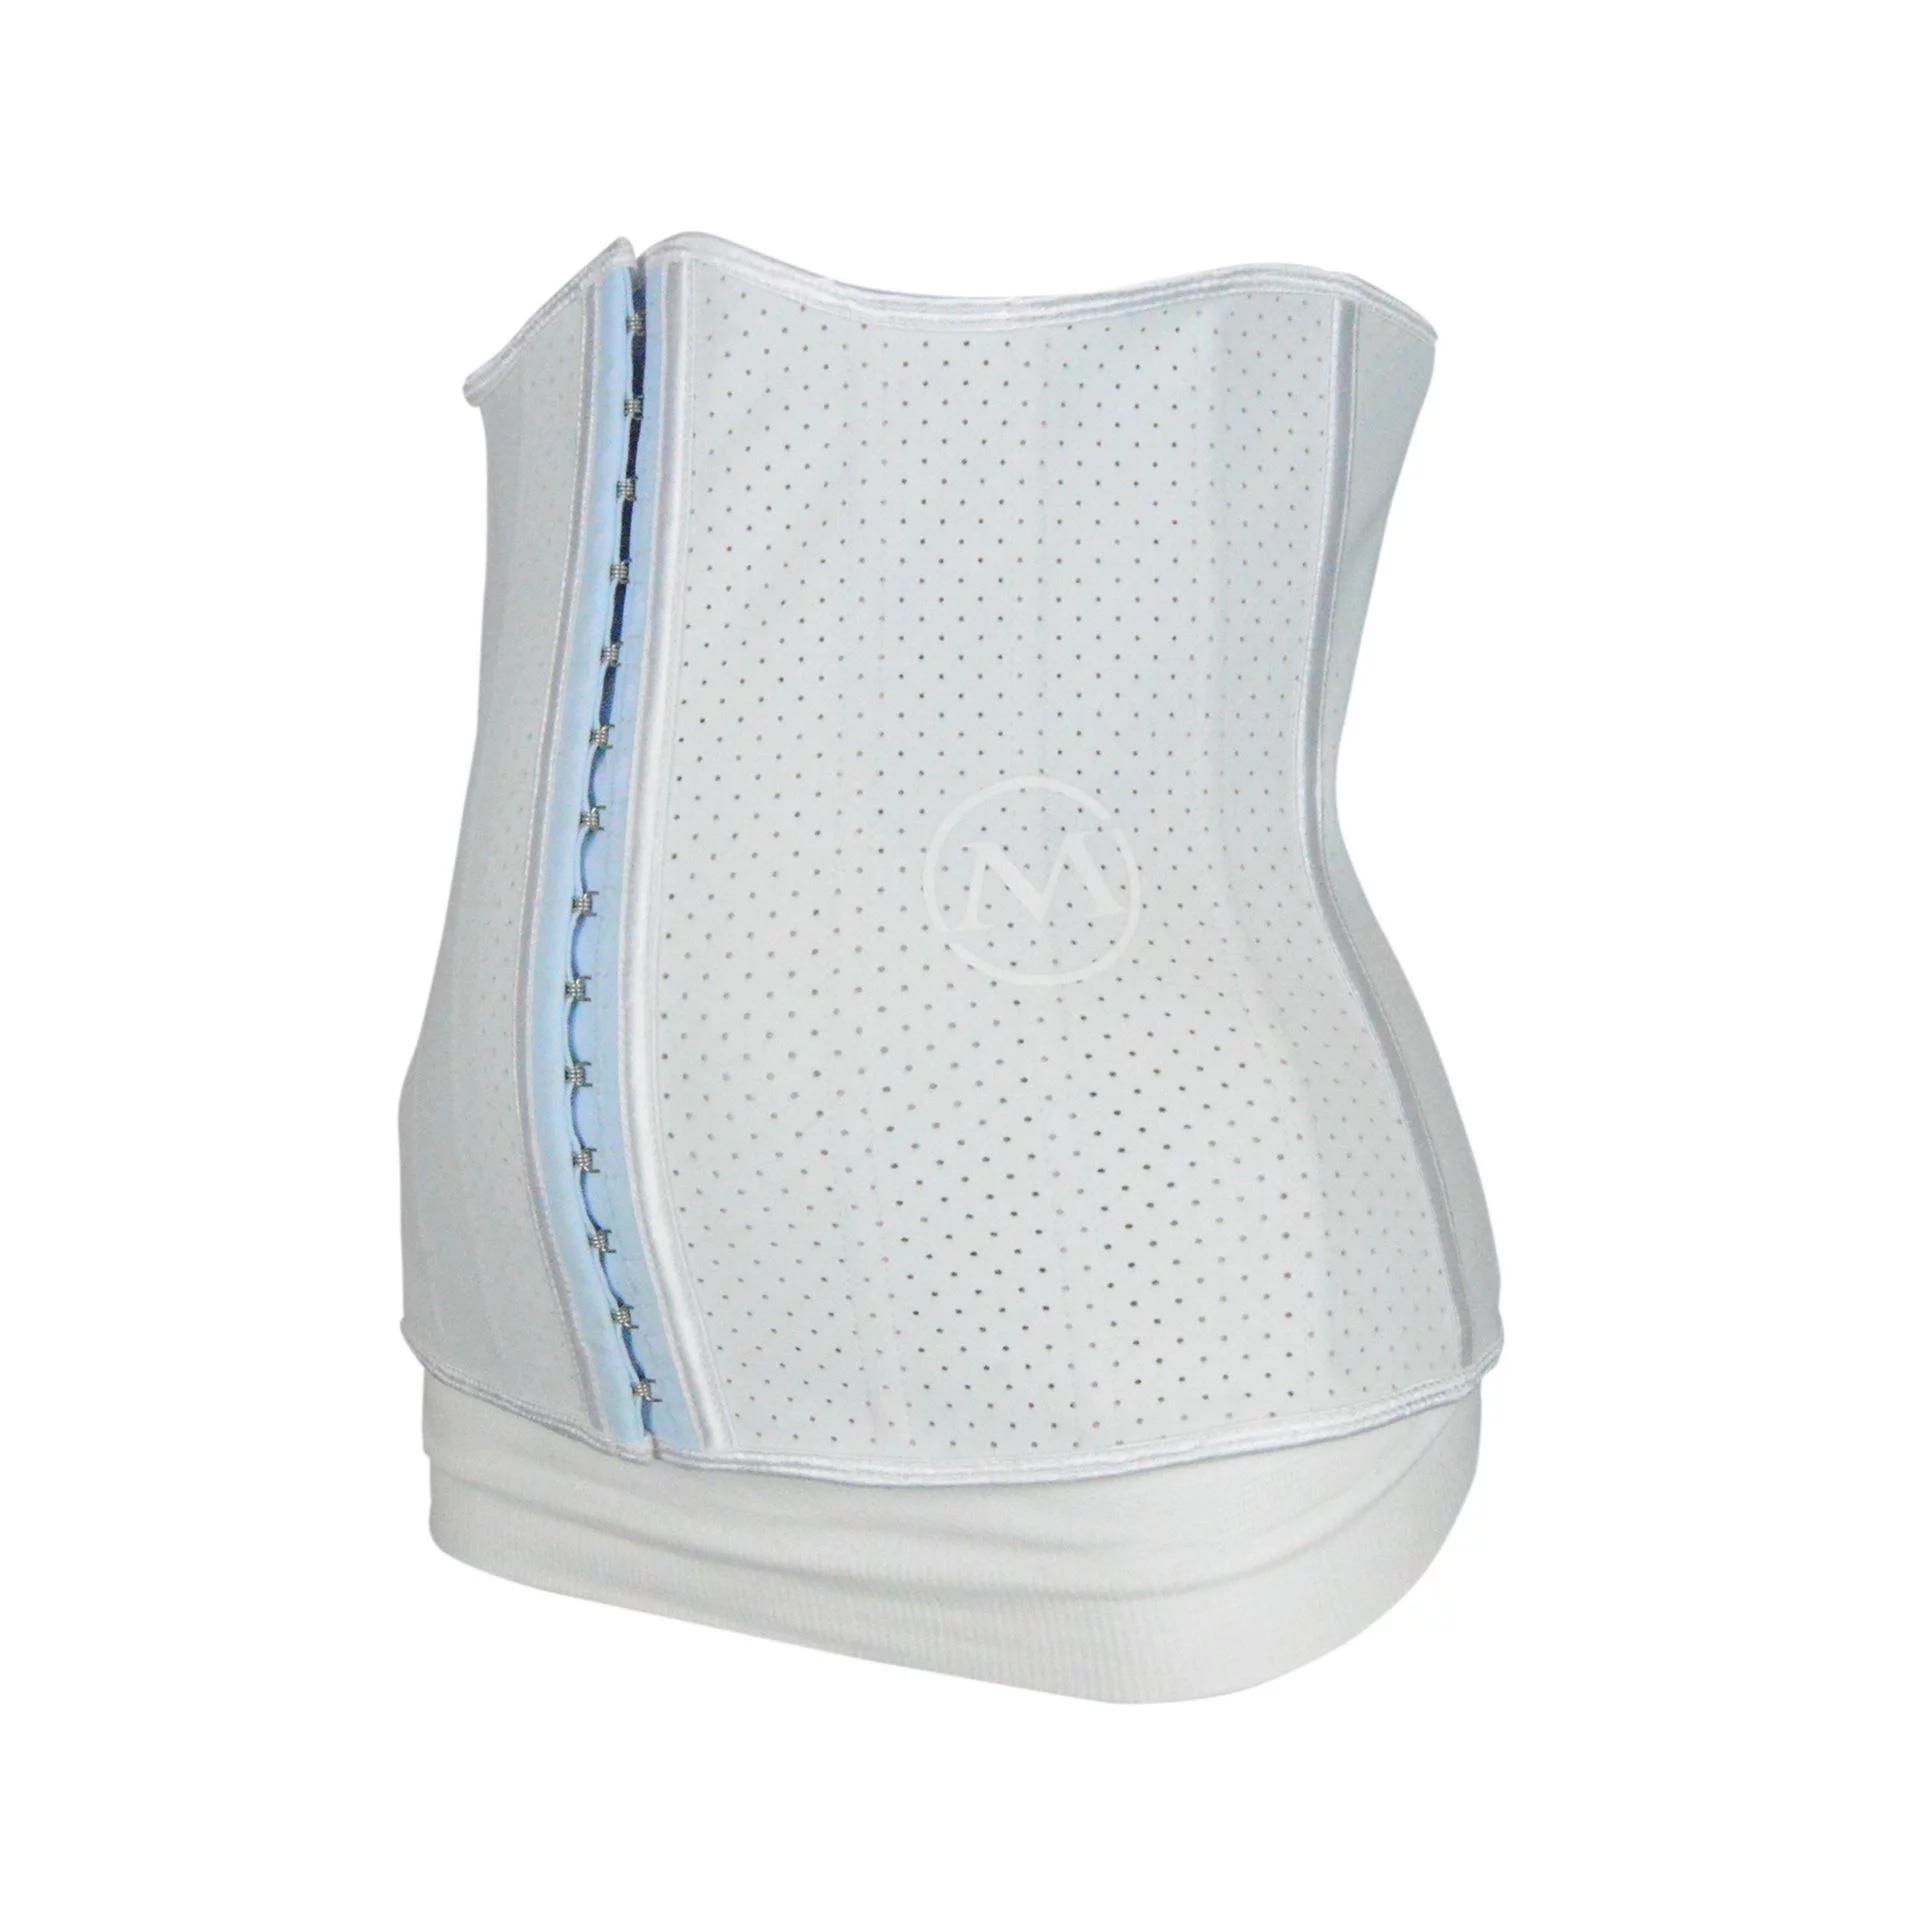 Maskateer - How to clean your waist trainer? To avoid